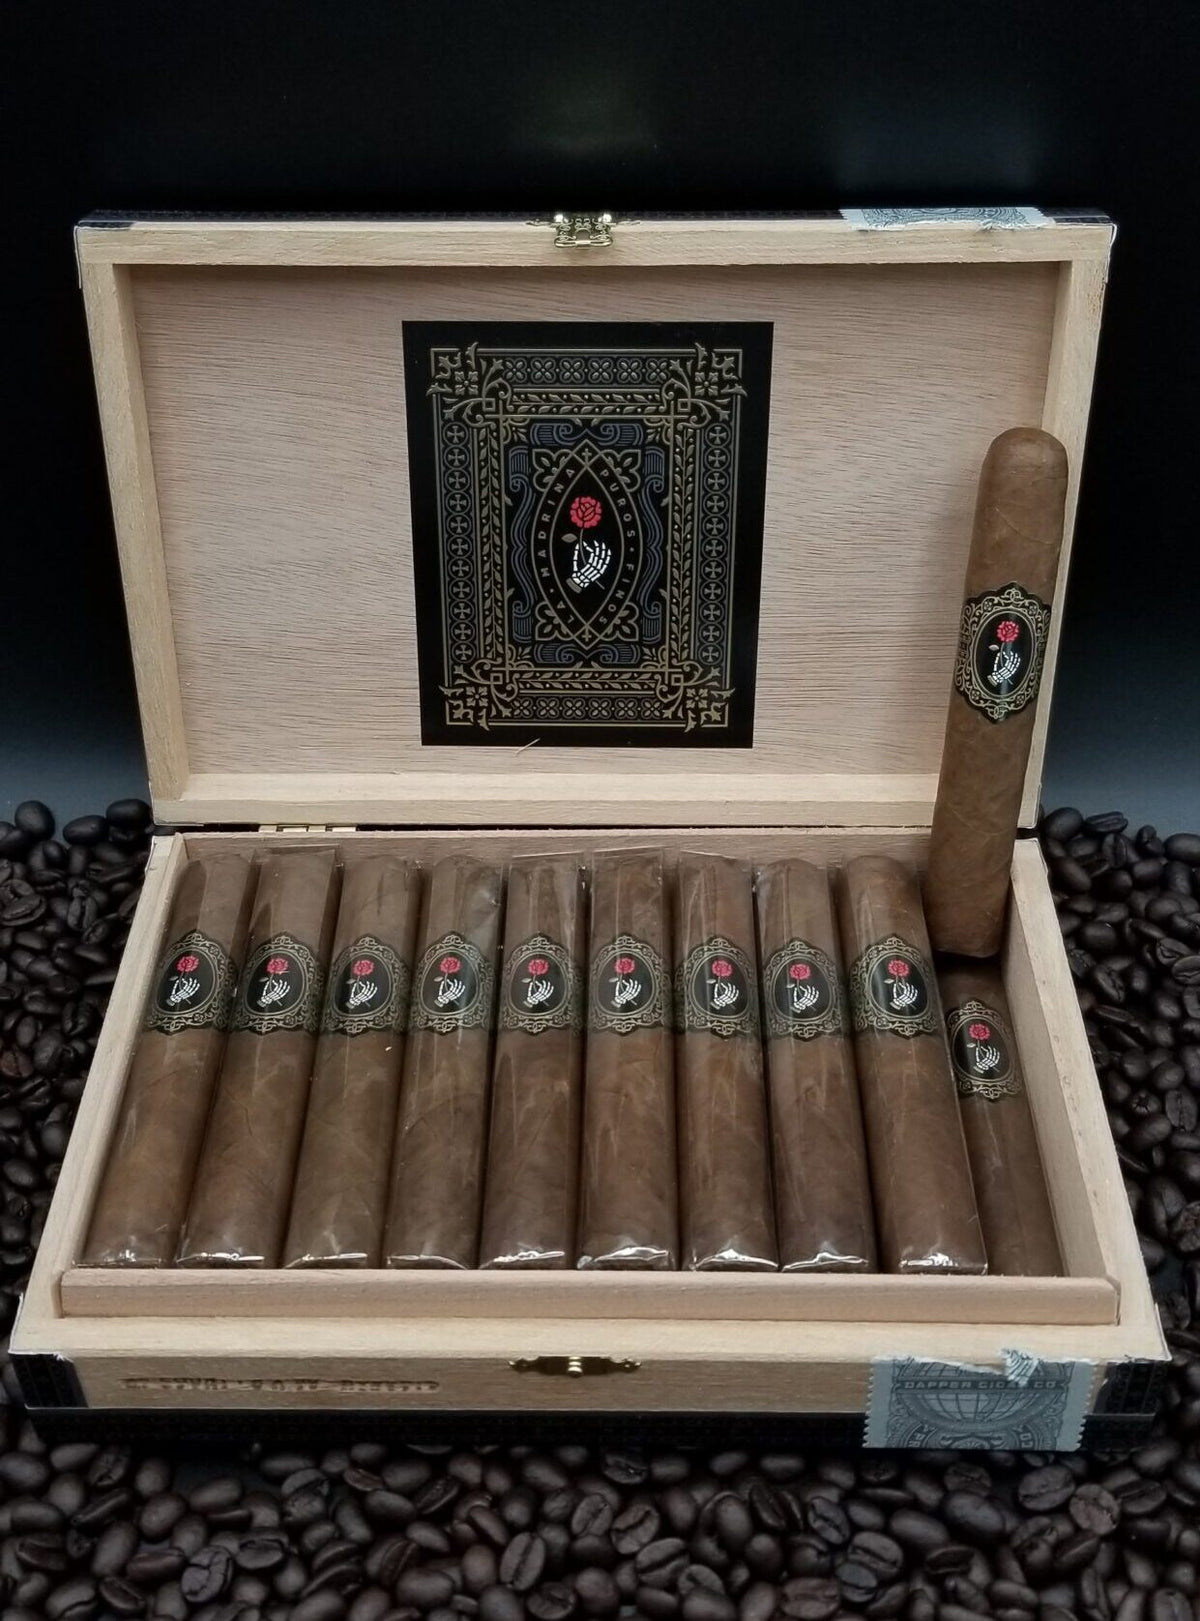 Dapper La Madrina Robusto cigars supplied by Sir Louis Cigars